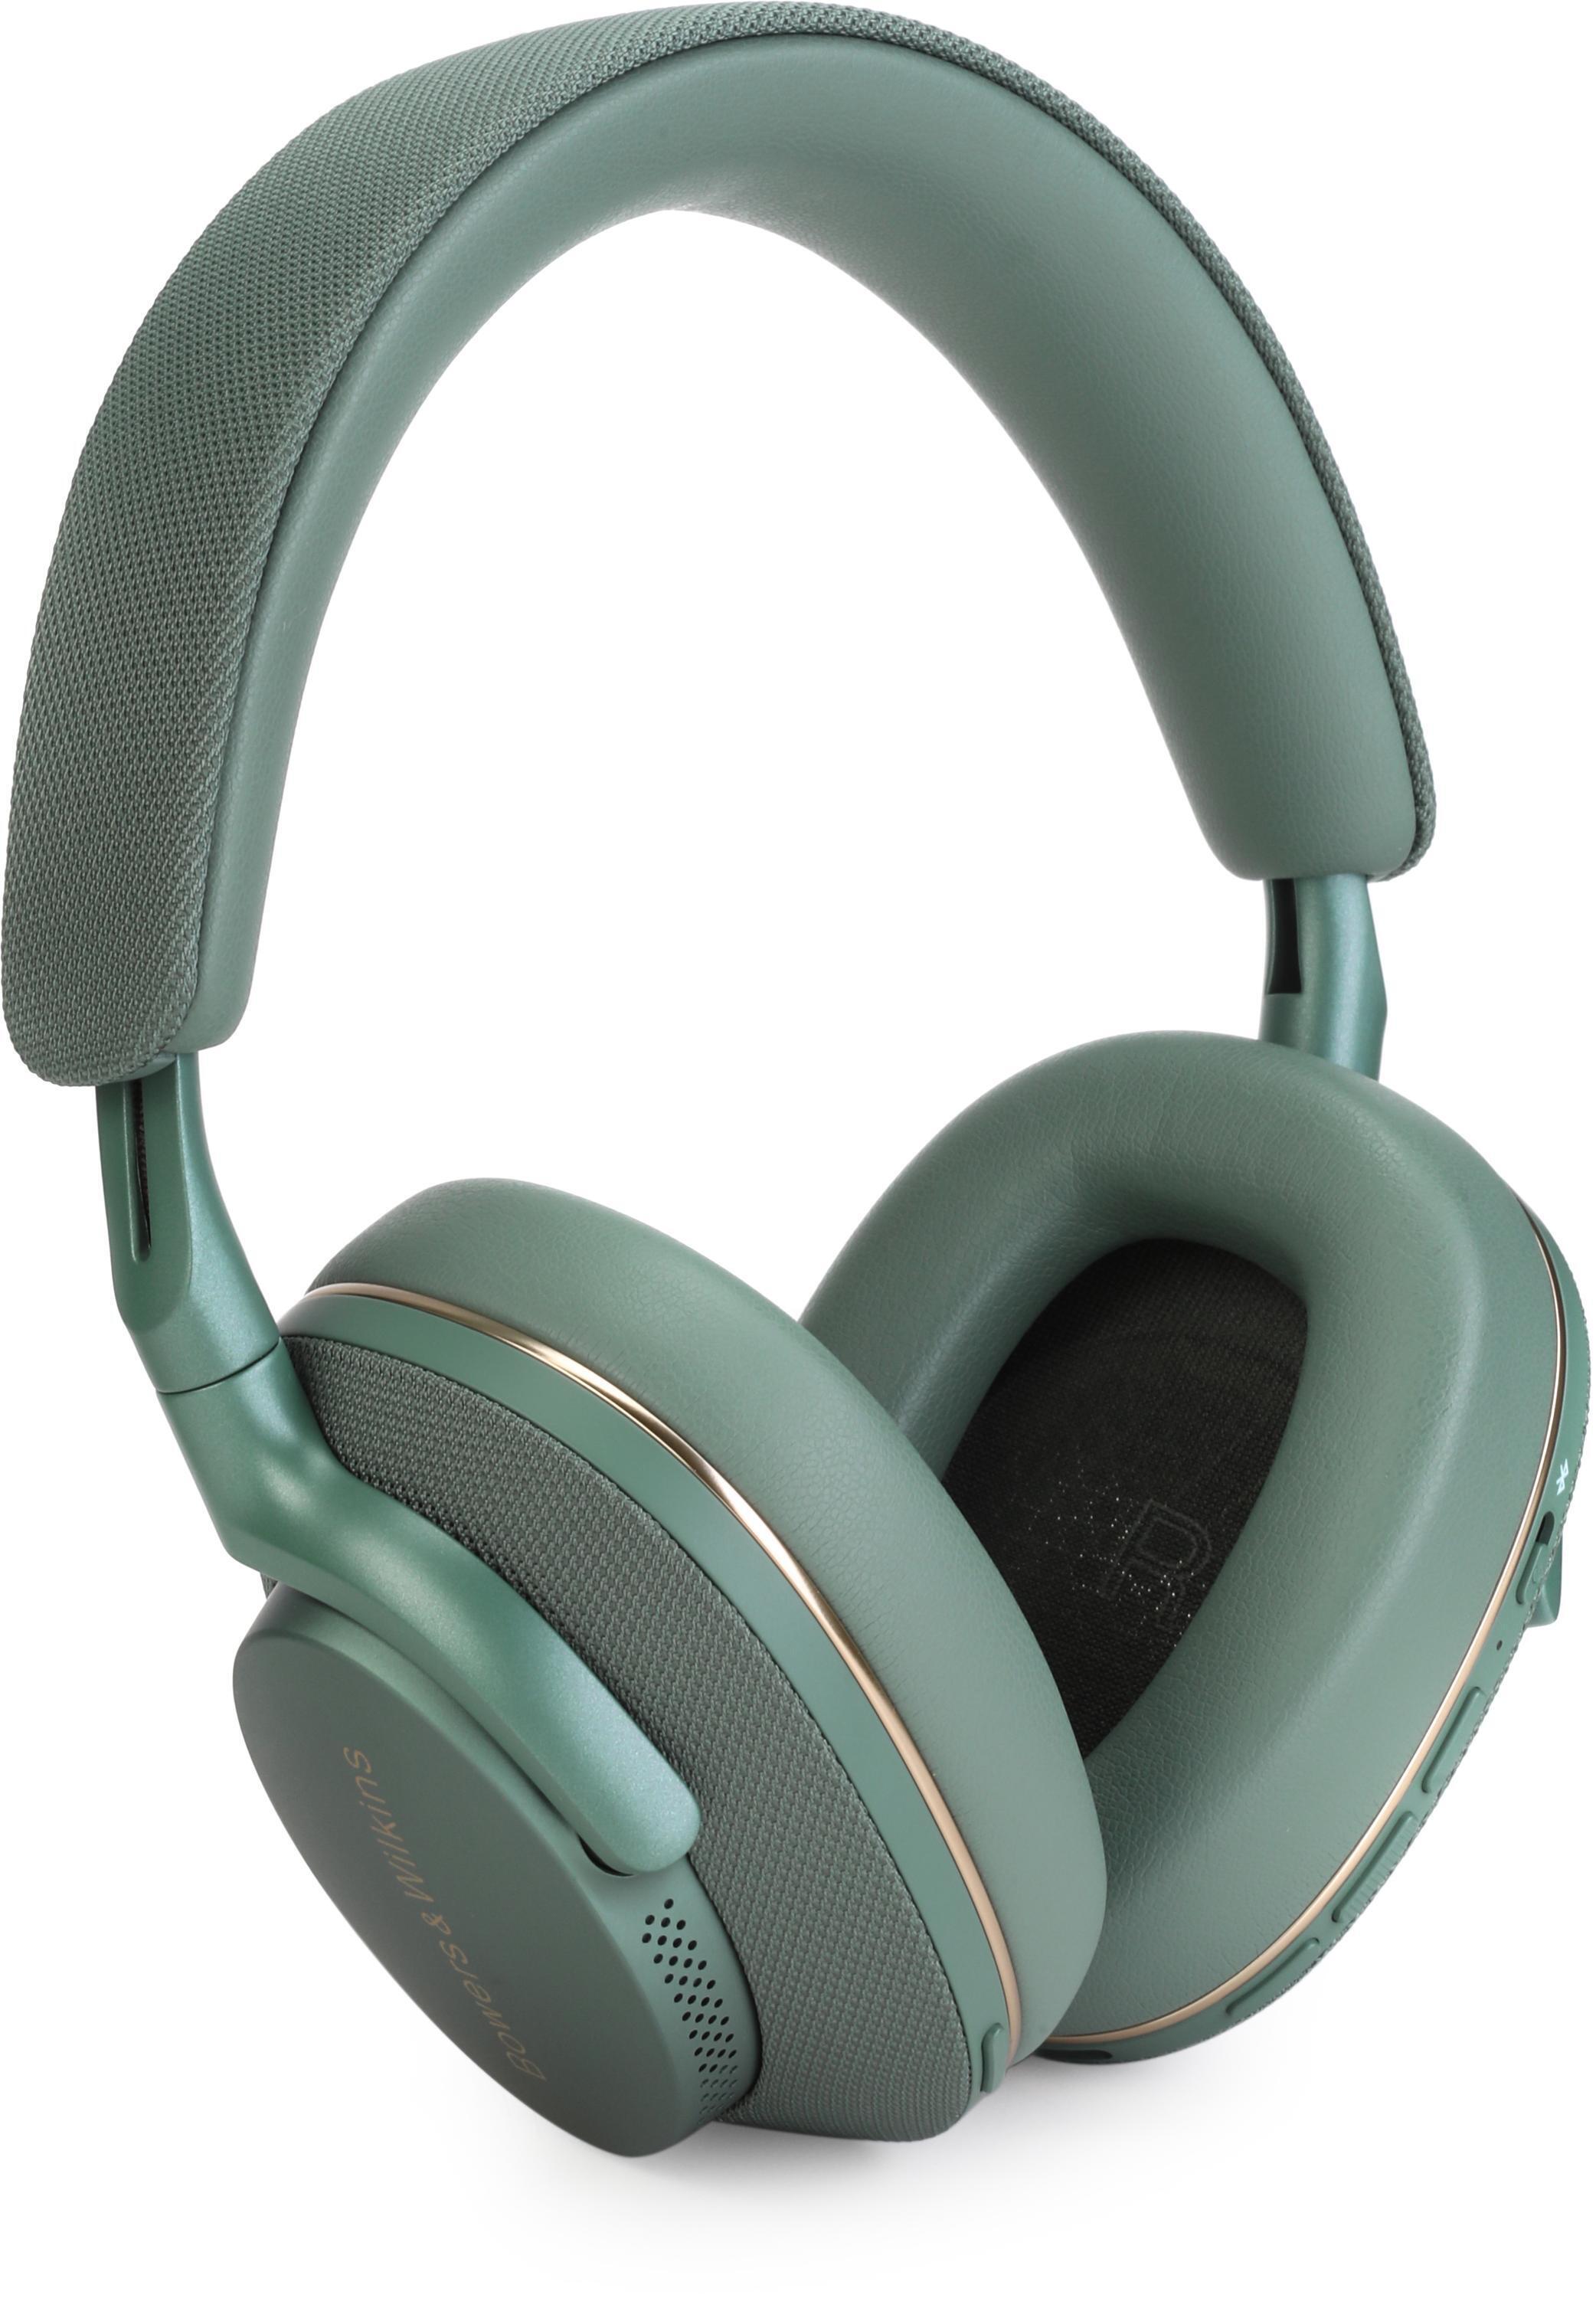 Bowers & Wilkins PX7 S2e Over-ear Noise-canceling Headphones - Forest Green